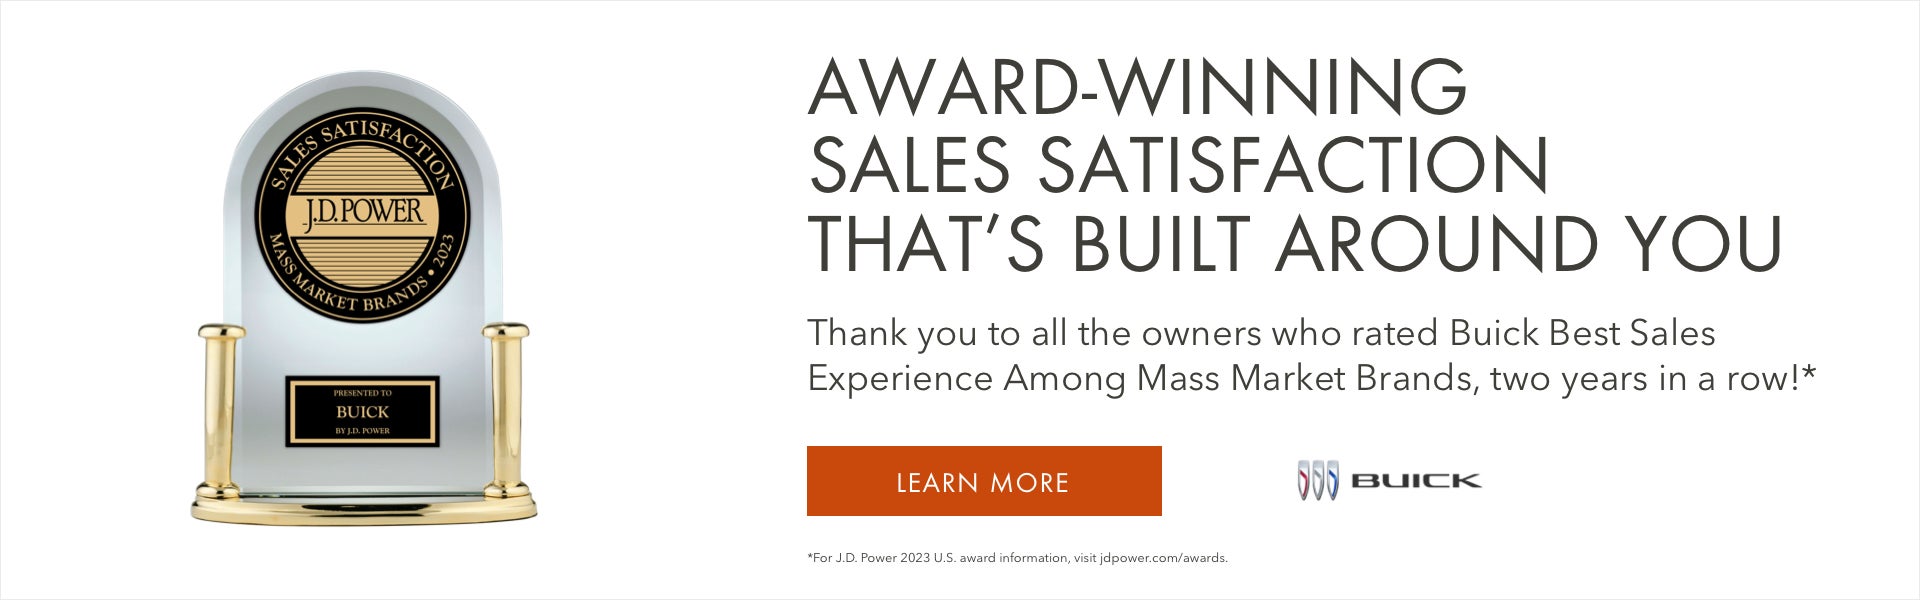 Thank you to all the owners who rated Buick Best Sales Experience Among Mass Market Brands, two y...